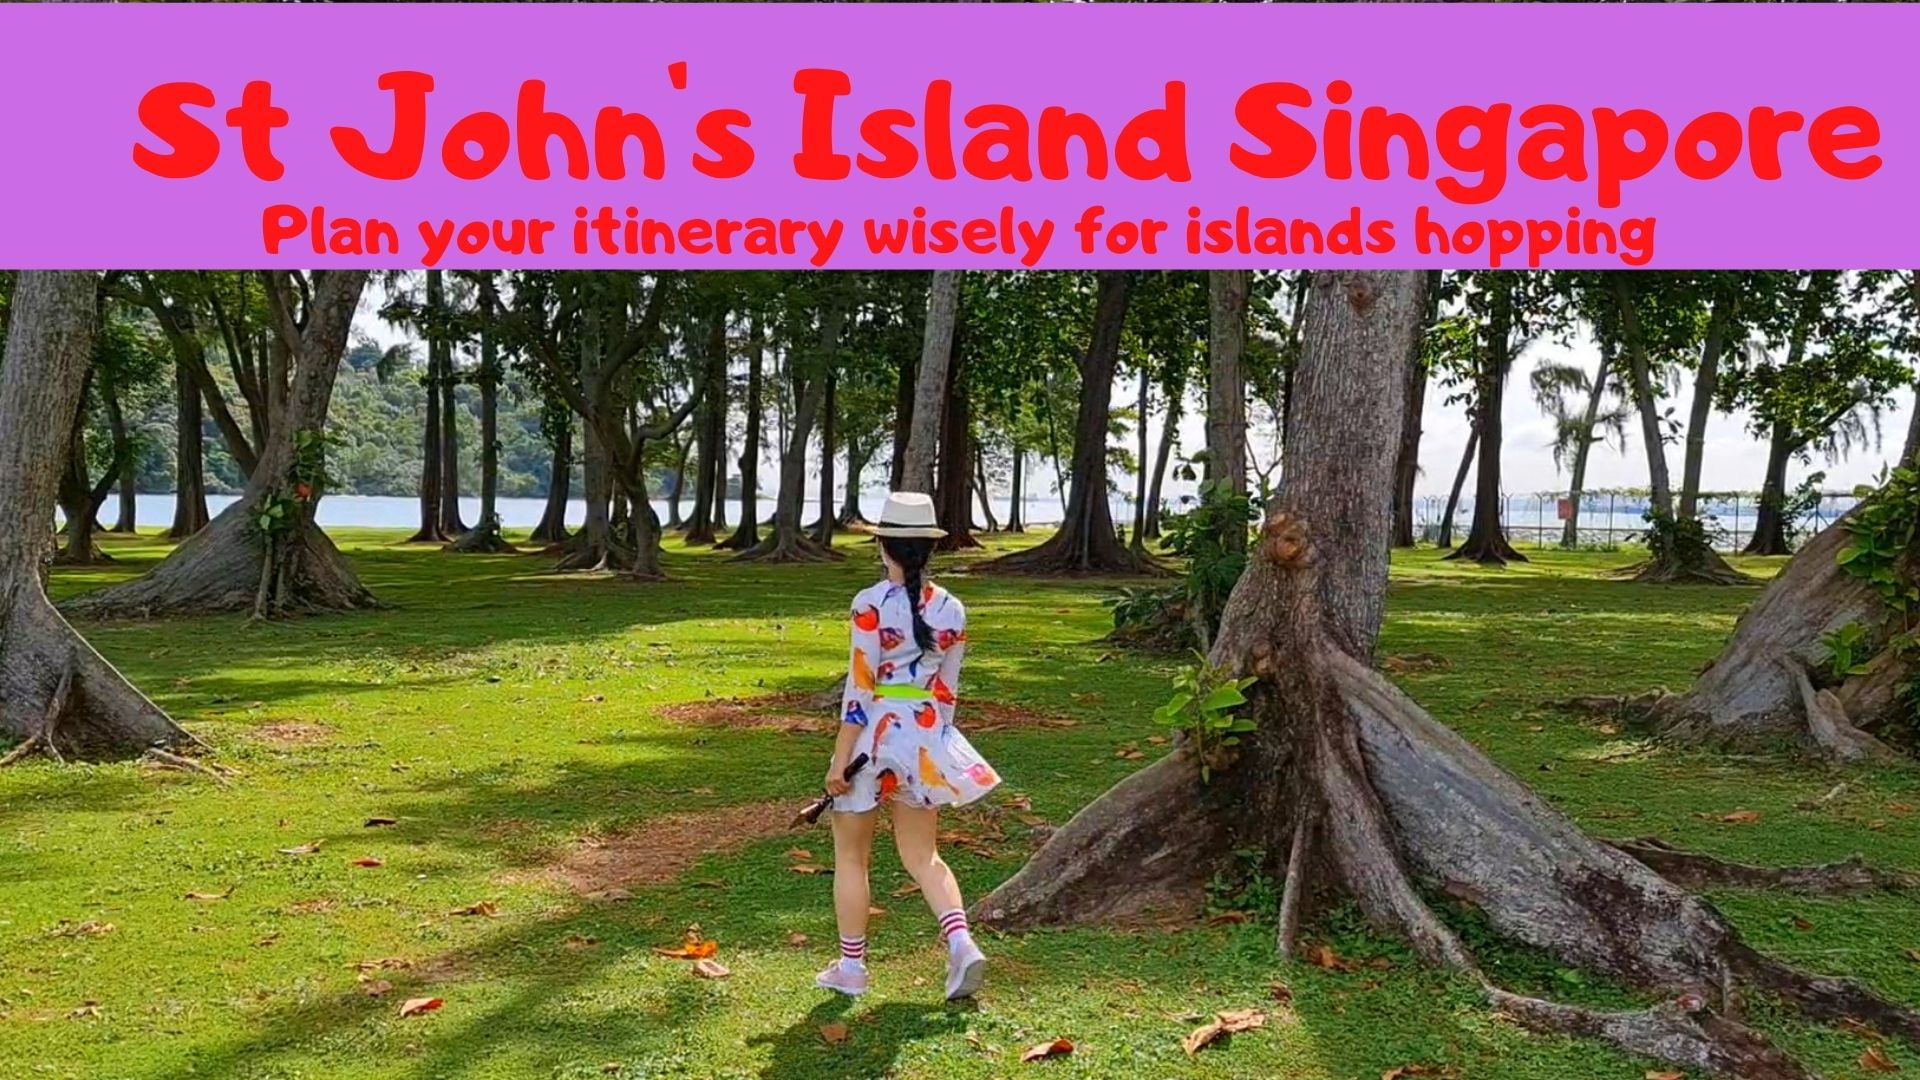 singapore-st-john-s-island-plan-your-trip-wisely-for-islands-hopping